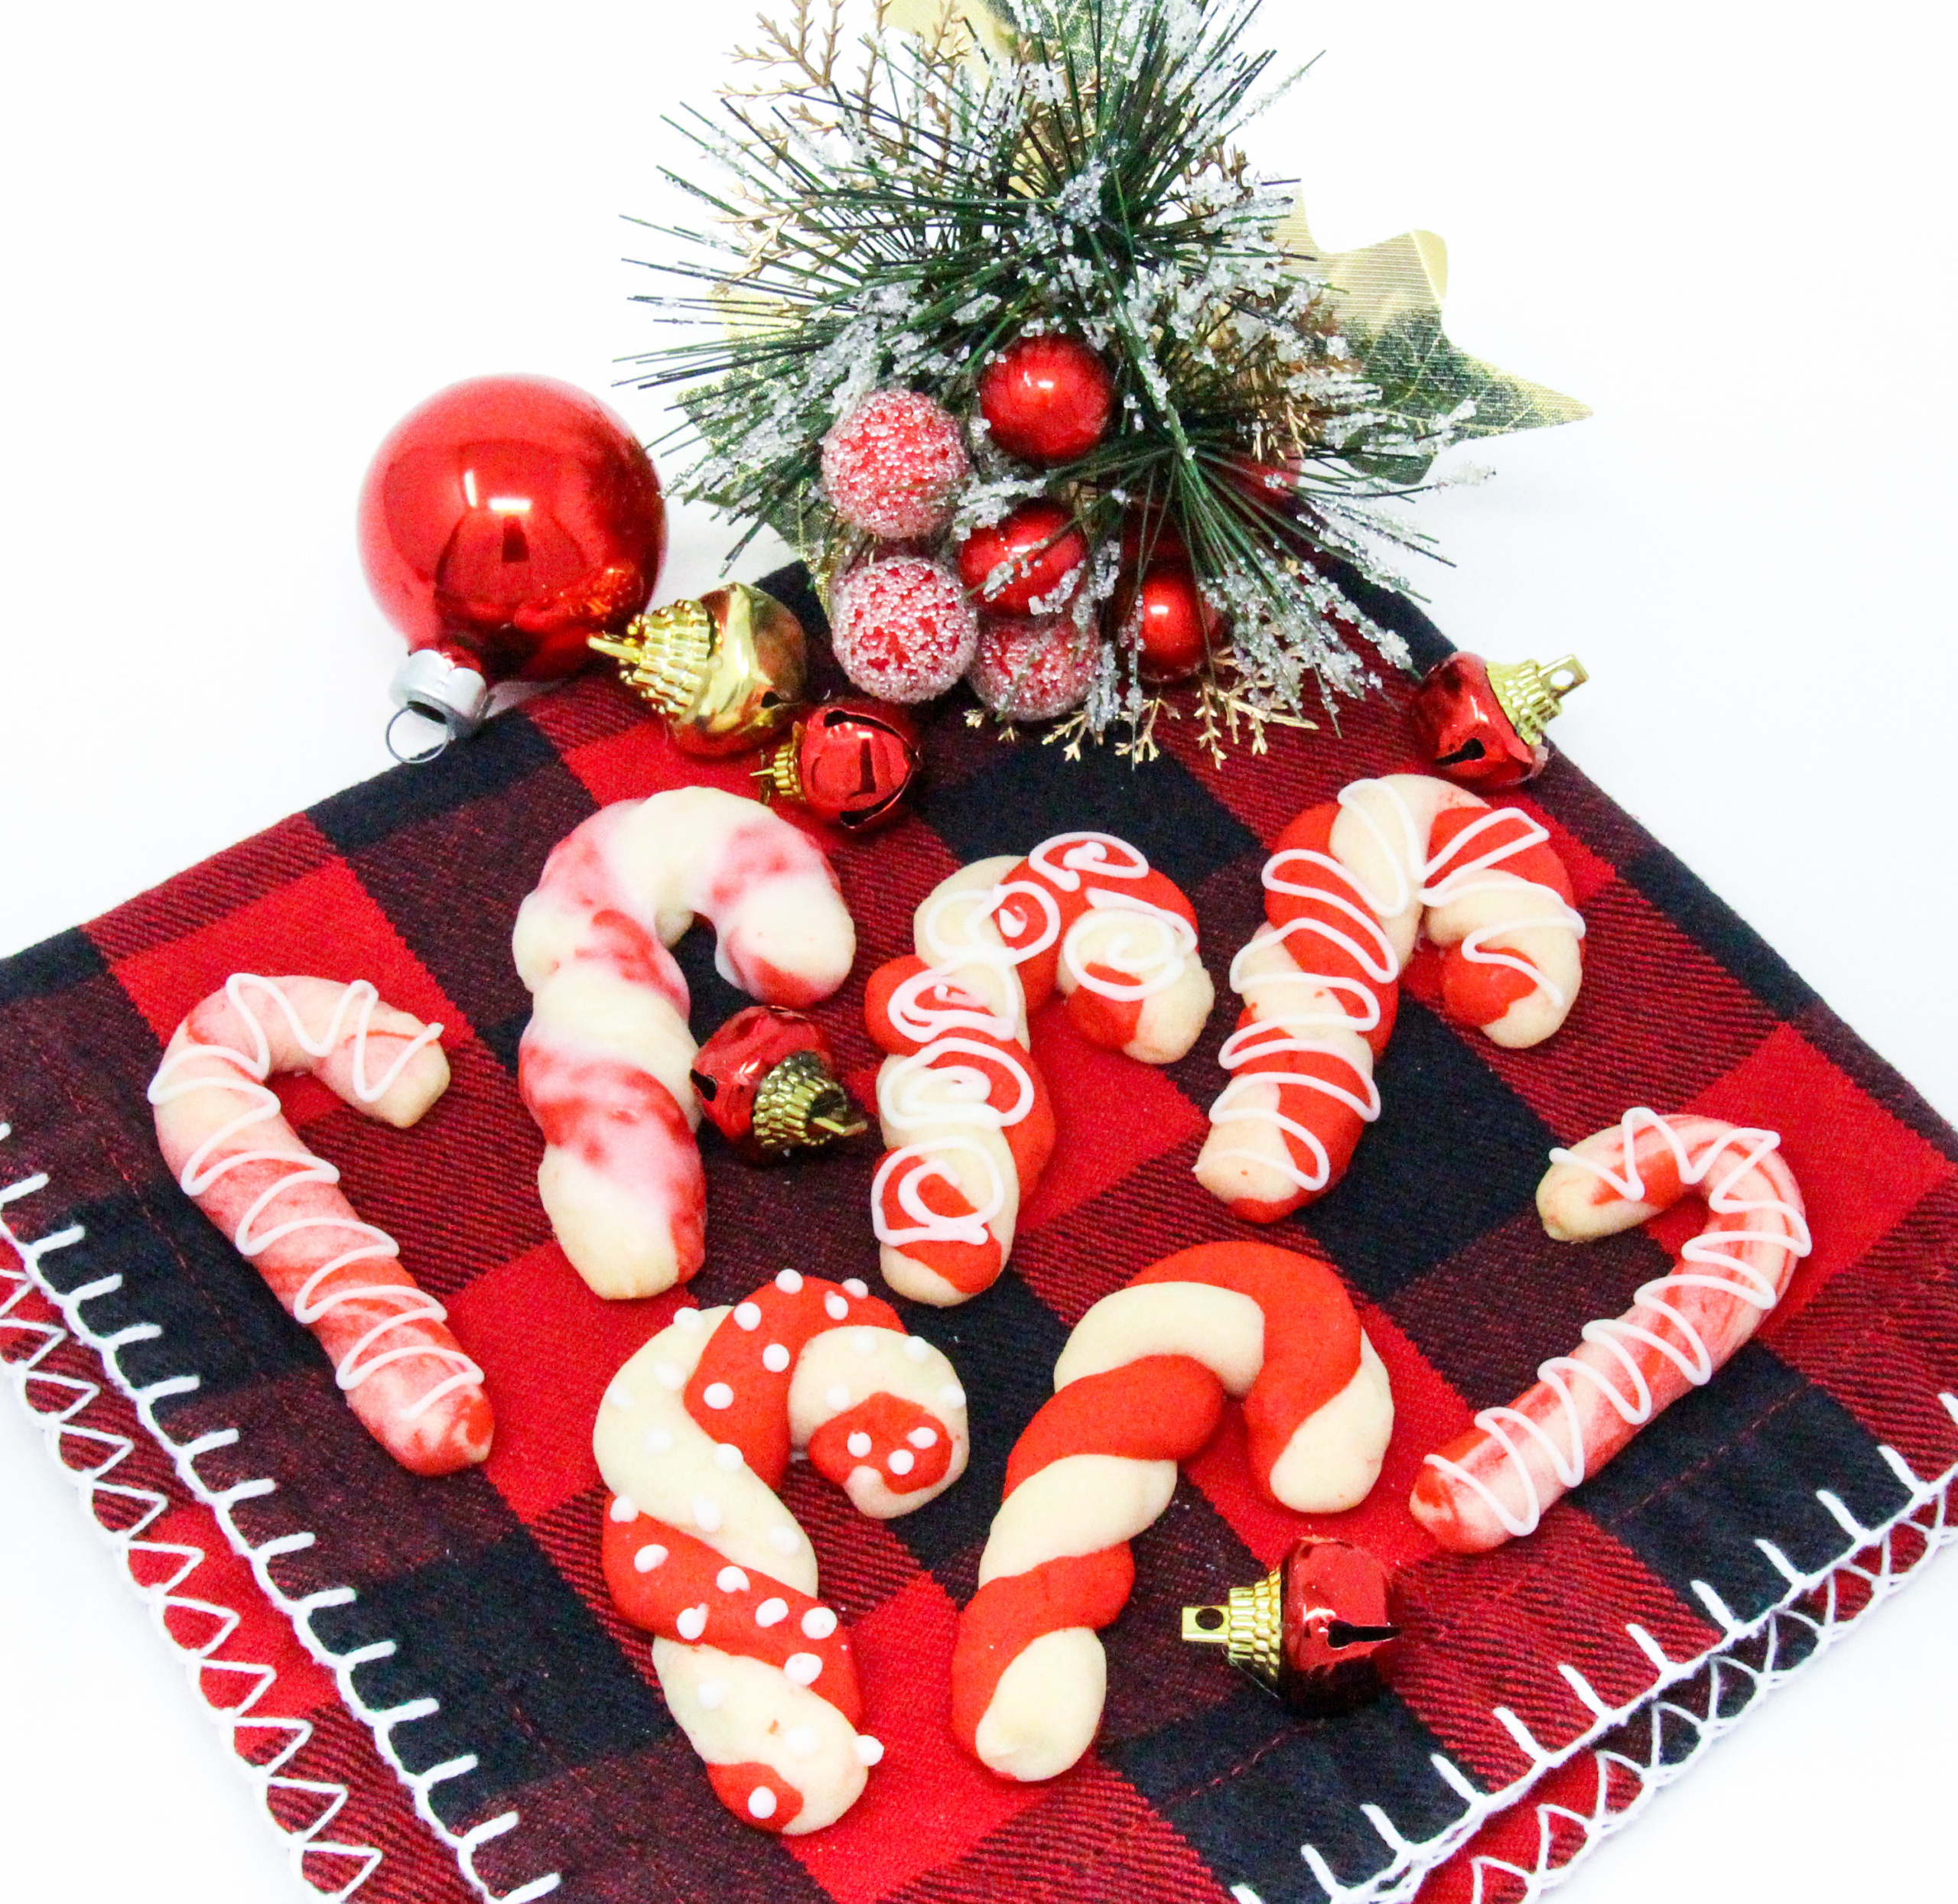 The colorful twists of the peppermint, and red Candy Cane cookies will add a delicious and jolly look to your holiday cookie platter! Recipe shared with permission granted by Leslie Budewitz, author of PEPPERMINT BARKED. 